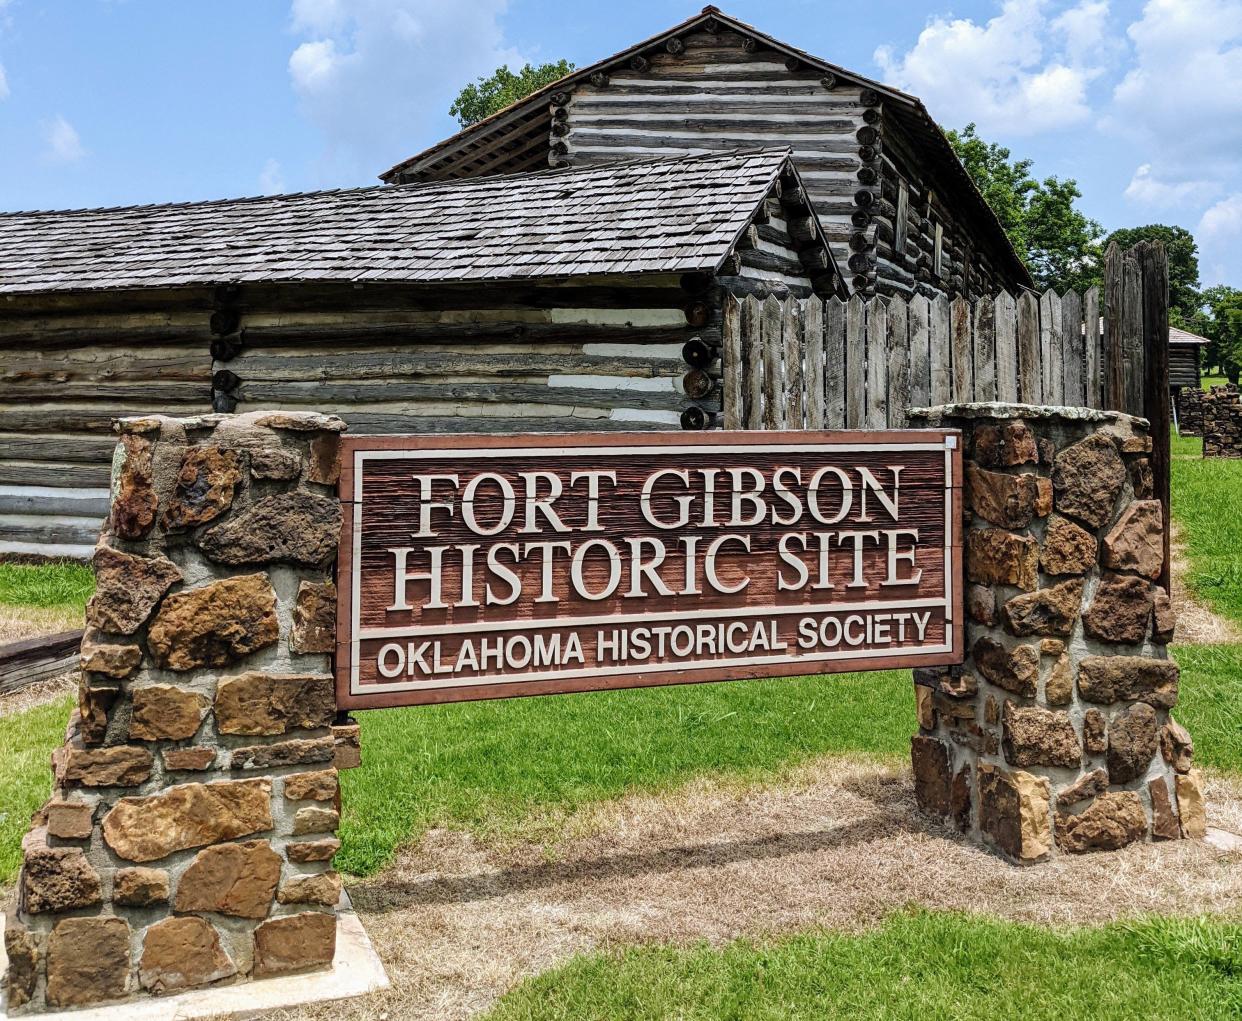 The 200th anniversary of the establishment of Fort Gibson, the army post, will be commemorated this Saturday at 907 N Garrison Ave. in the town of Fort Gibson. PROVIDED/OKLAHOMA HISTORICAL SOCIETY